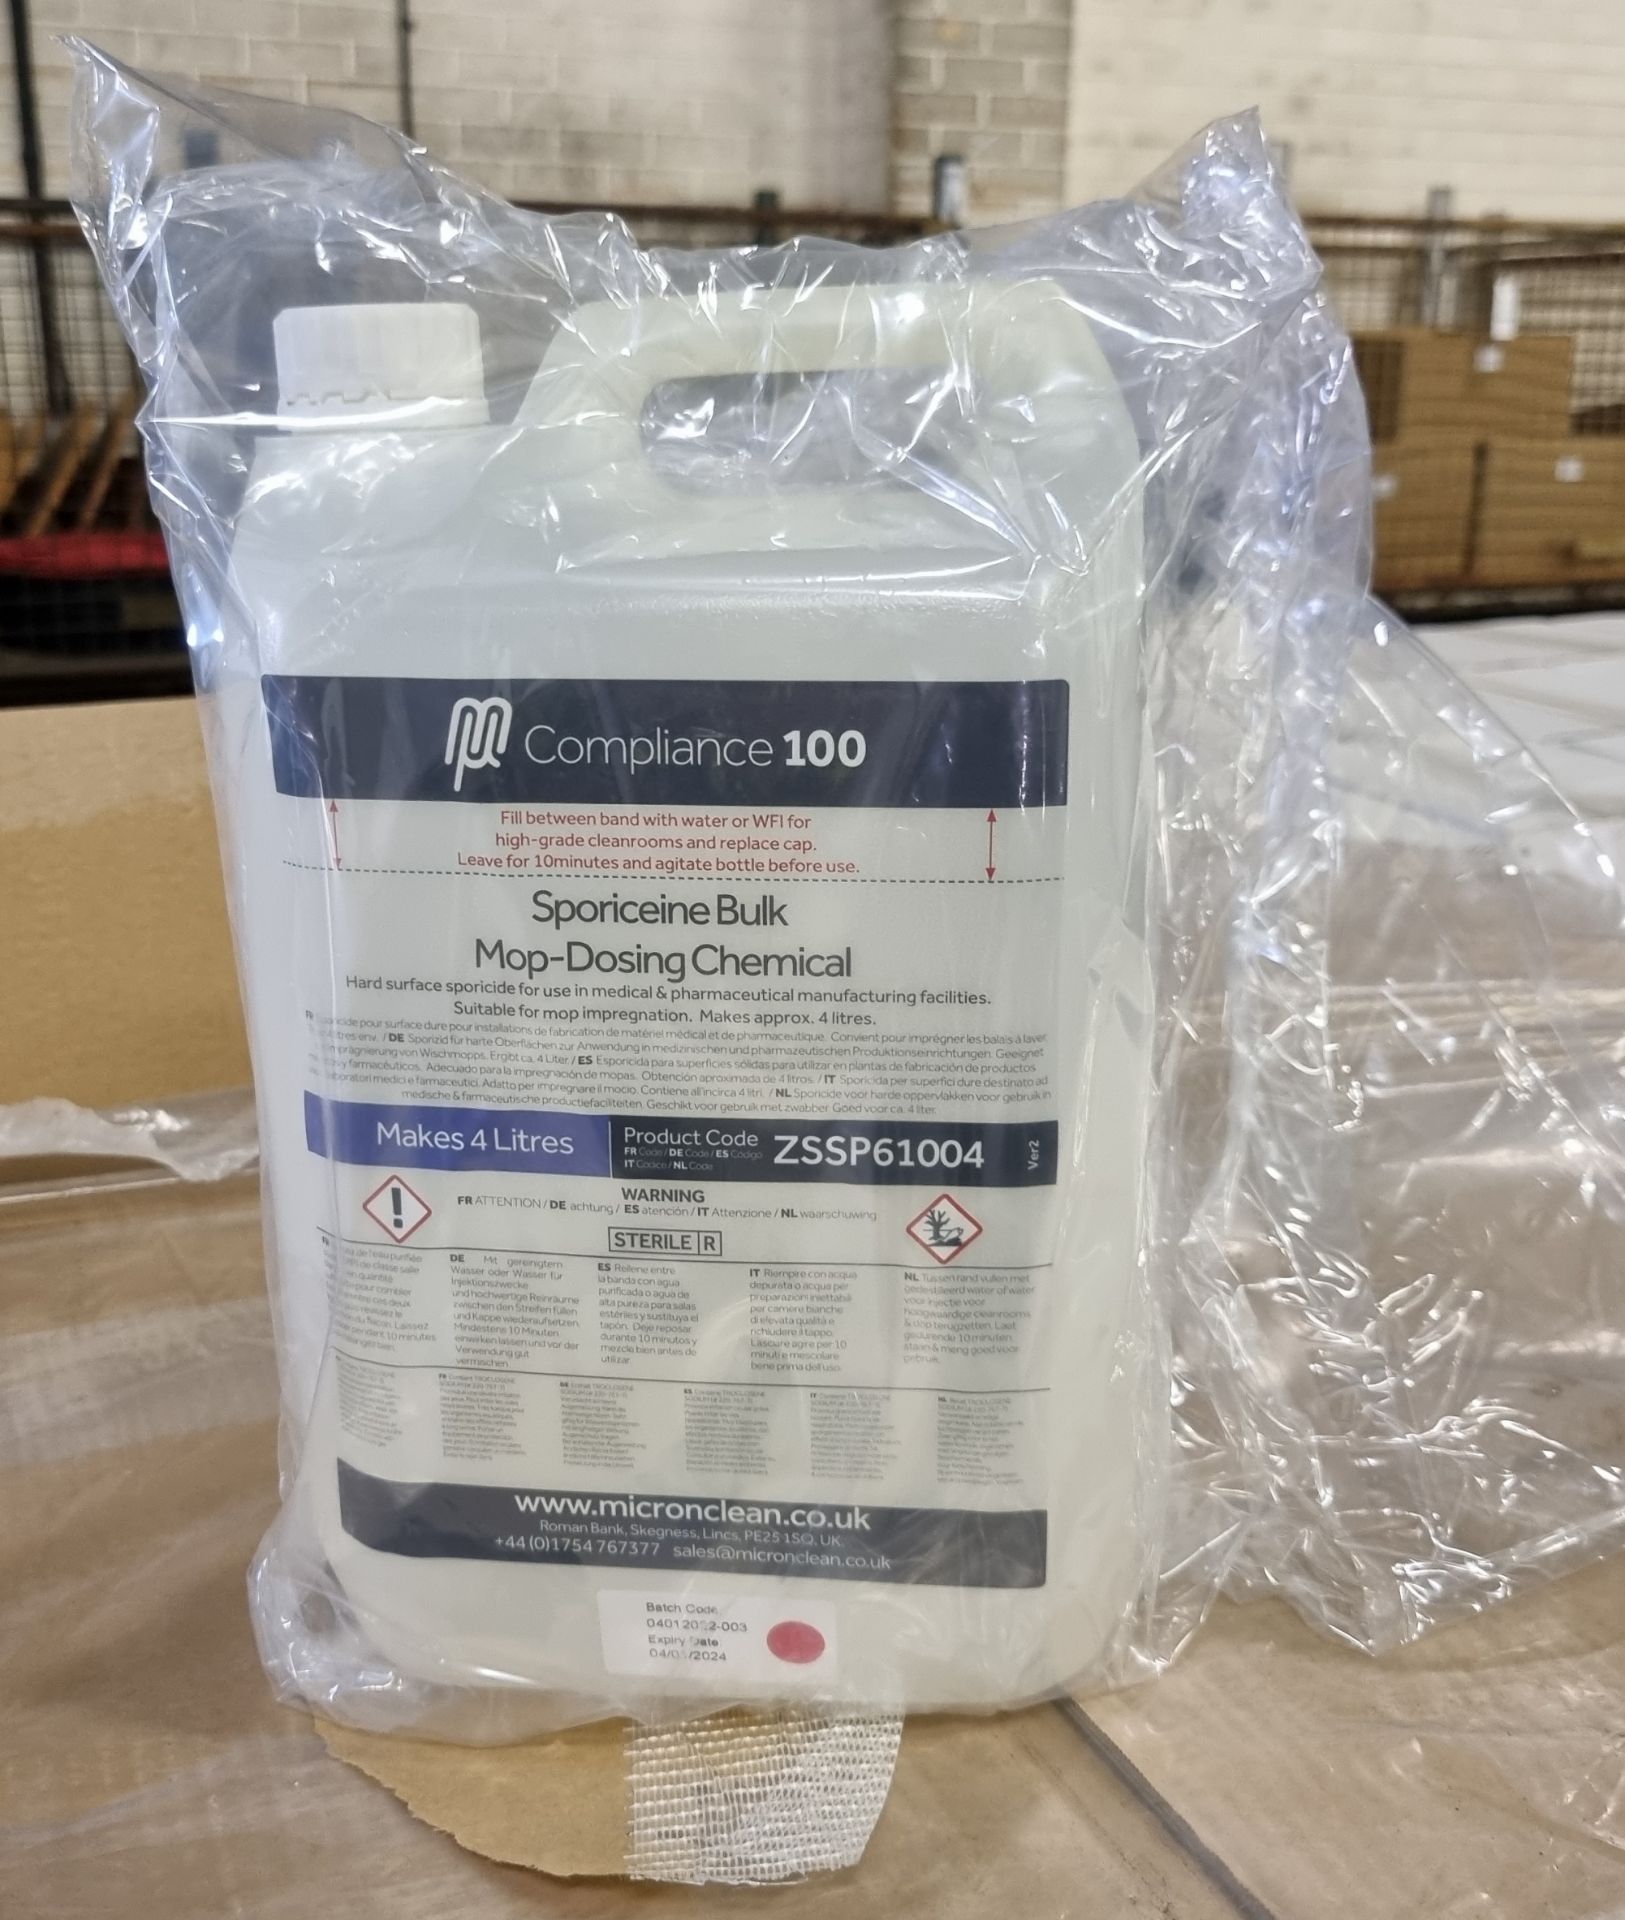 18x boxes of Sporiceine ZSSP61004 mop-dosing chemical - 9 bottles x 4 litre per box - Image 3 of 5